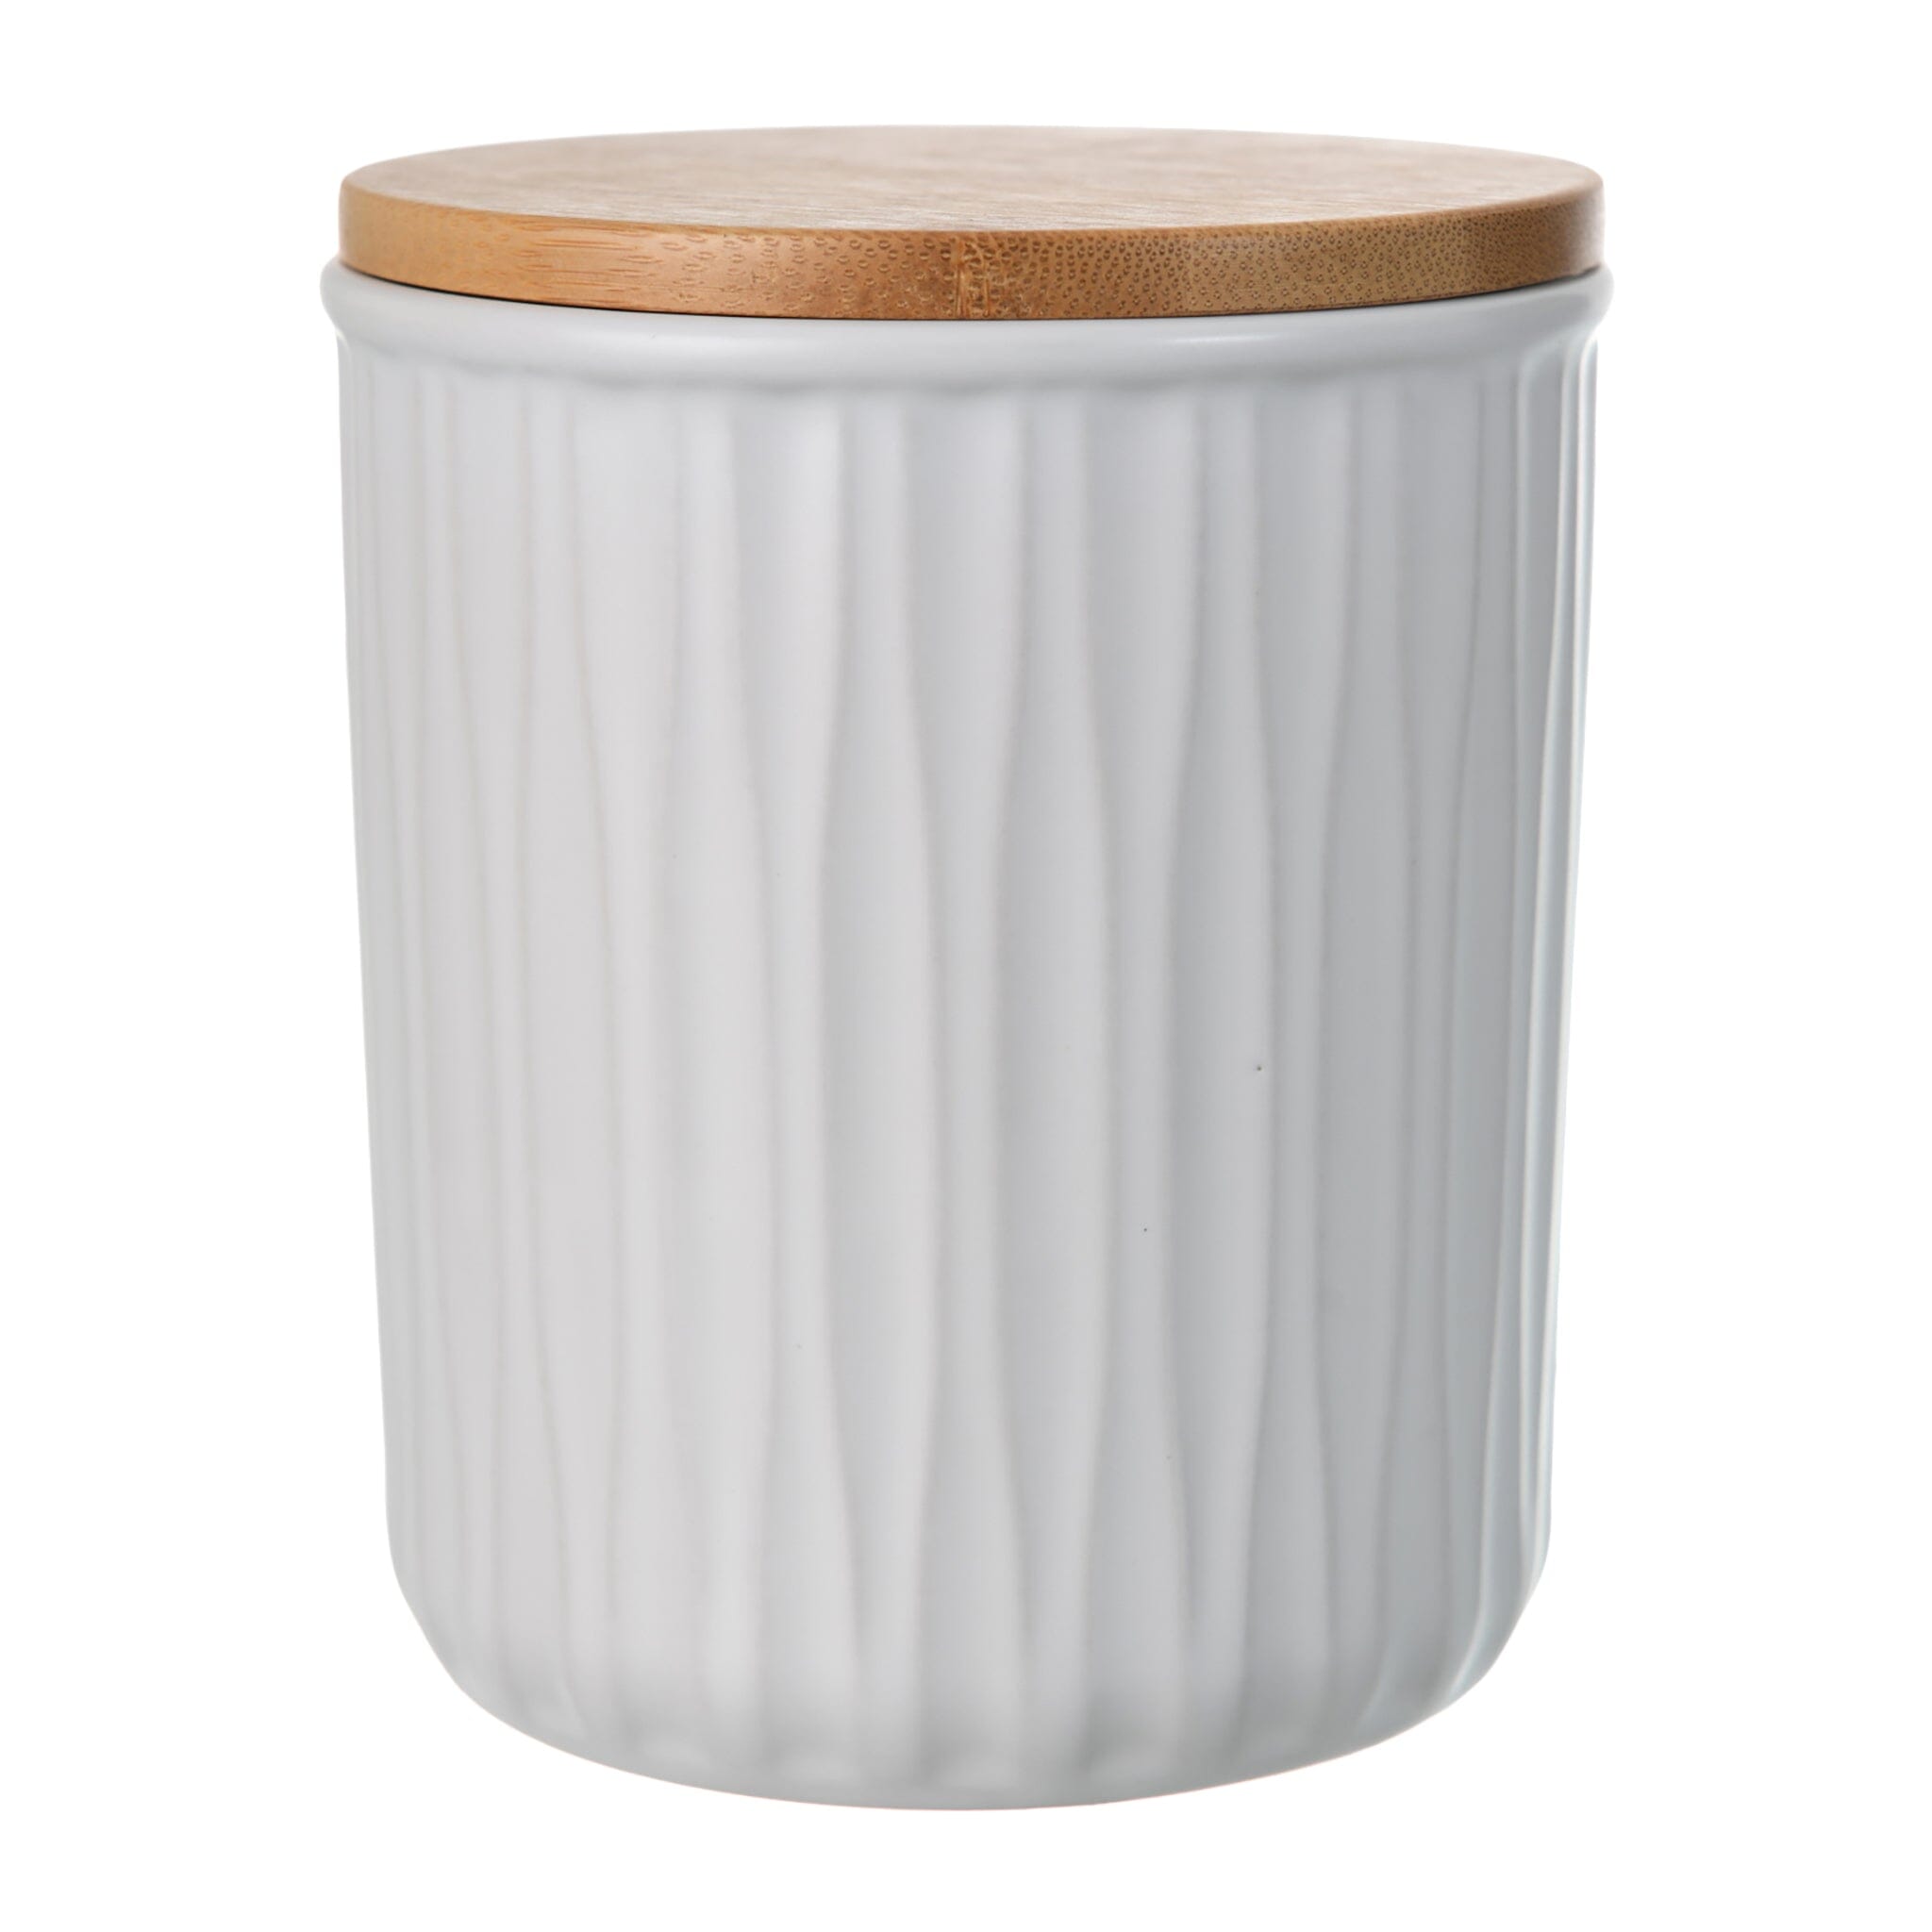 O'lala - Ceramic Jar with Wooden Cover - White - 9x12cm - 520008056